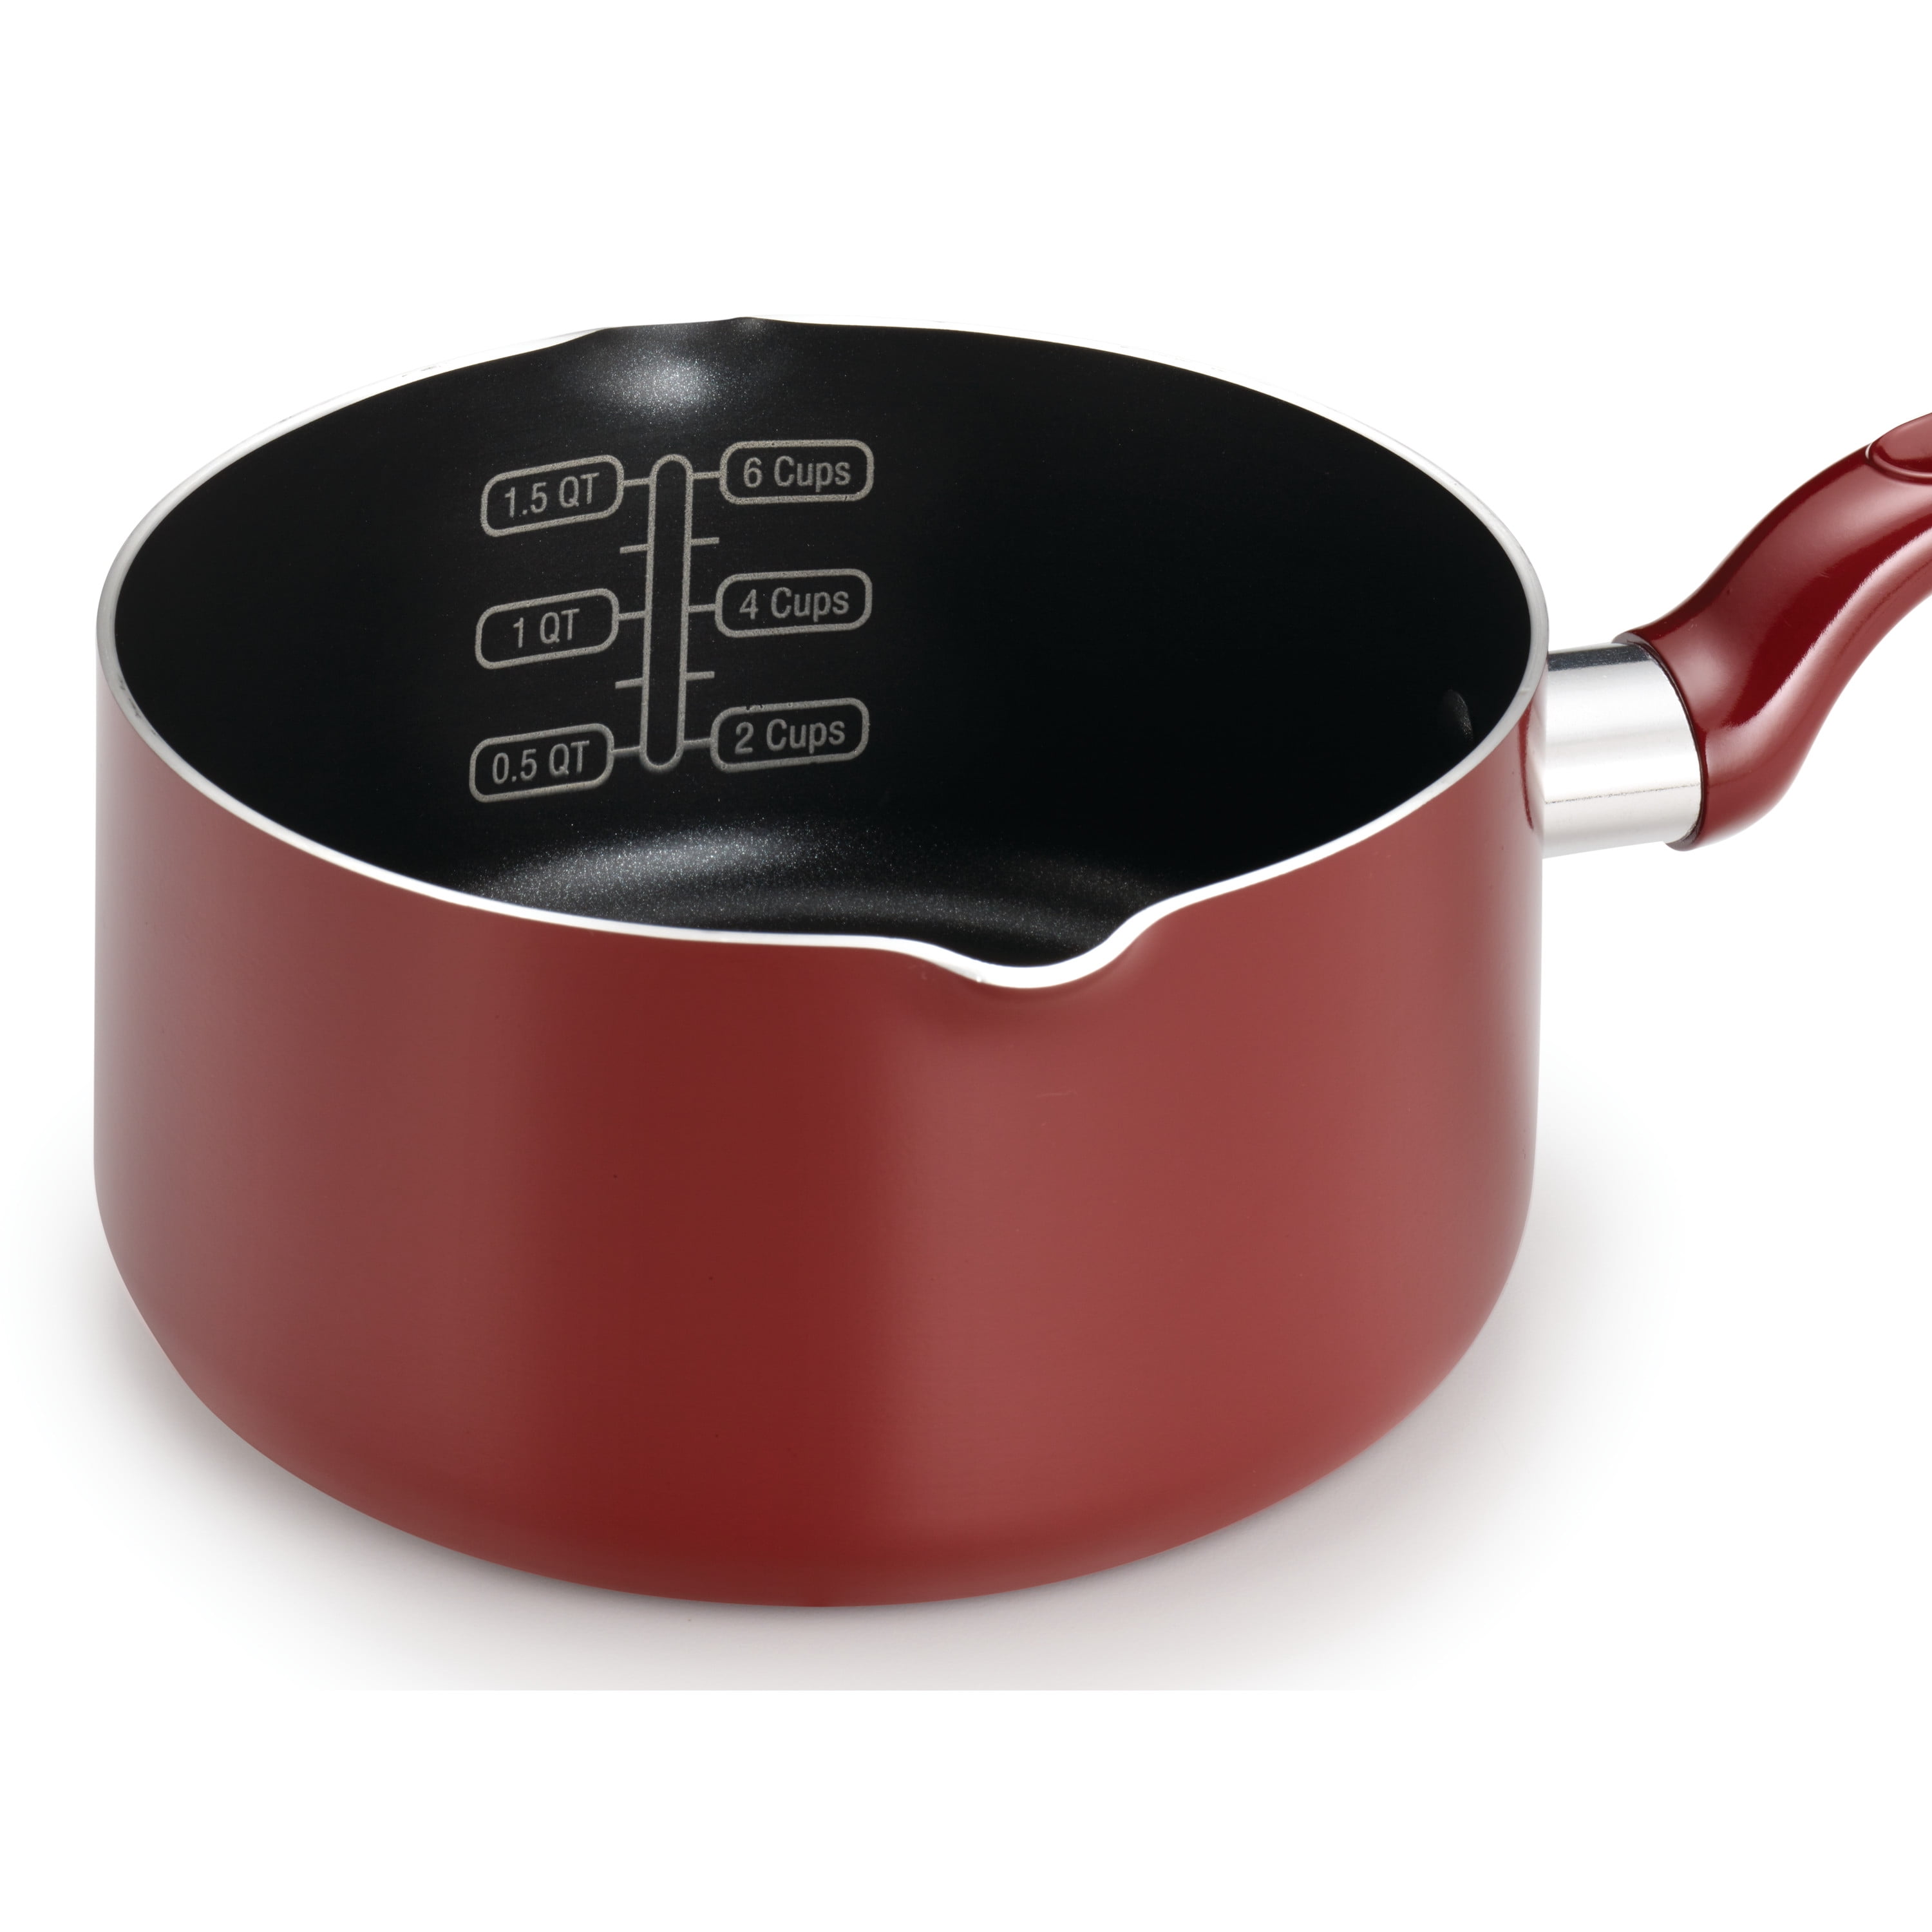 T-FAL T-fal Easy Care 12-Piece Non-Stick Cookware Set, Red B089SC64